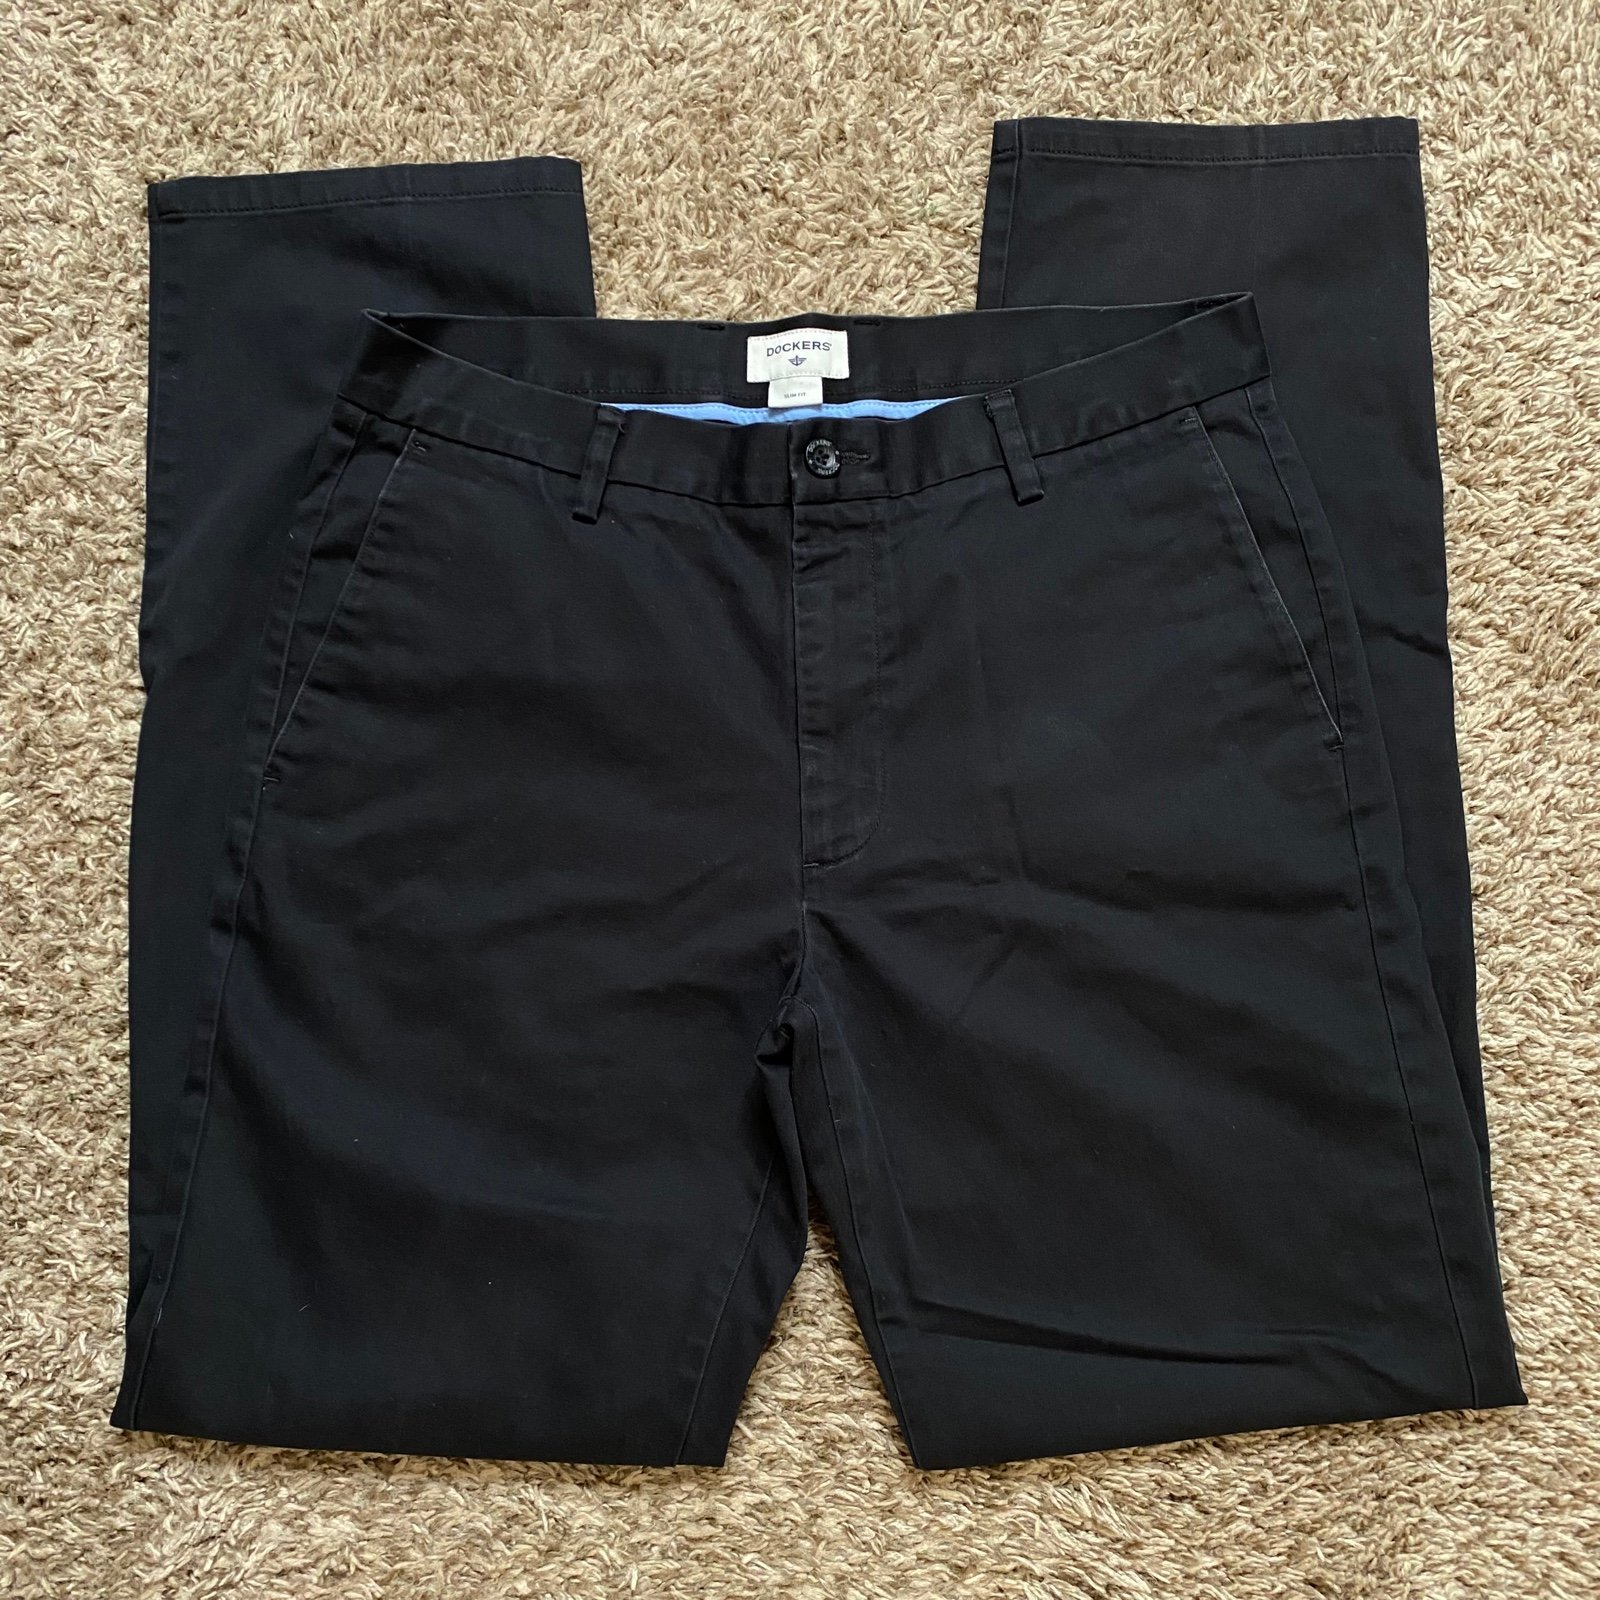 cheapest place to buy  Dockers pants o7fkLOIl4 online s